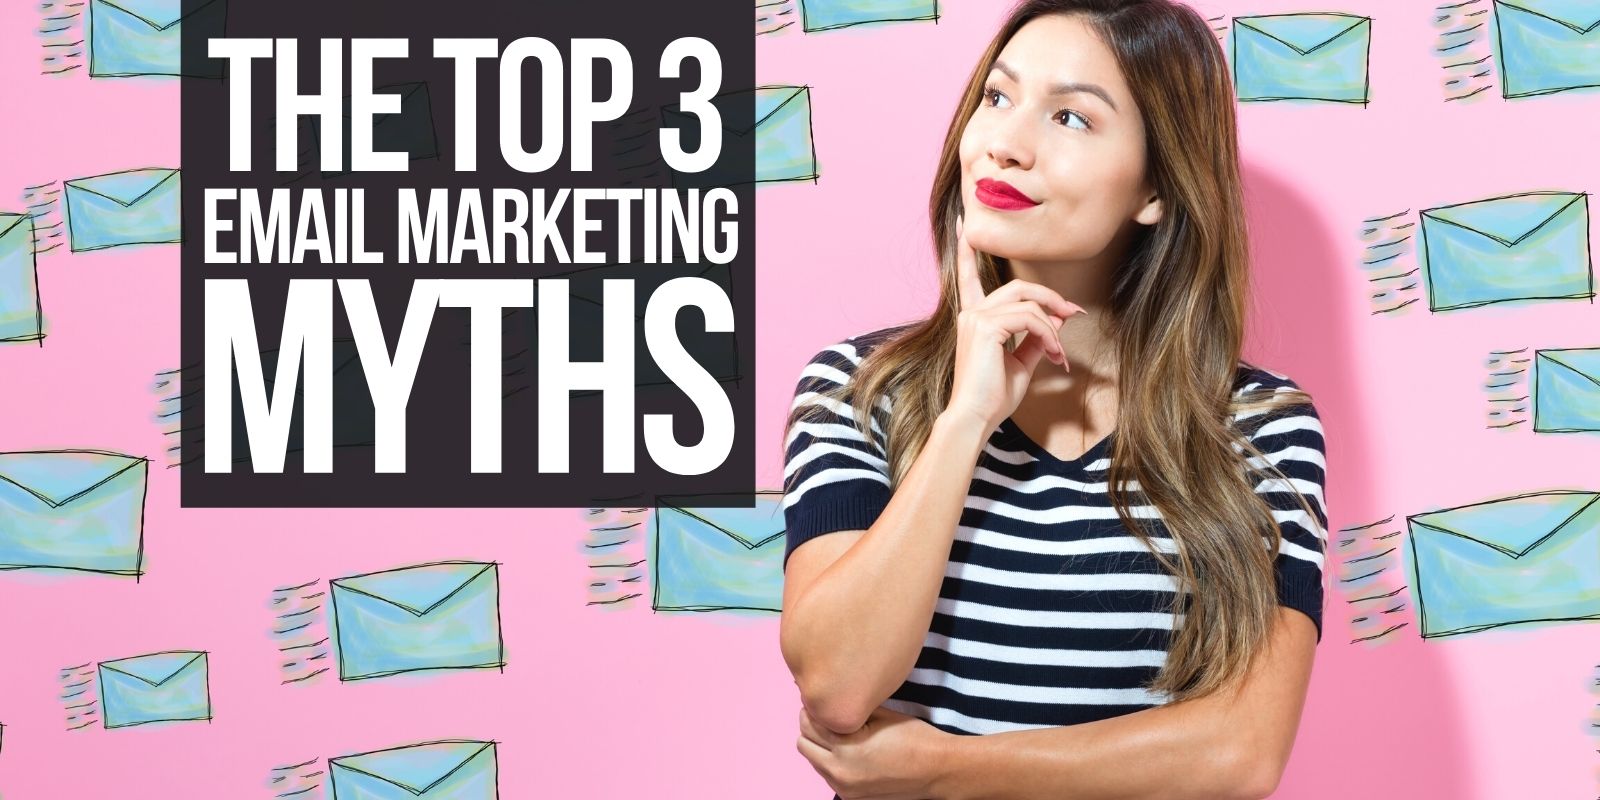 Top 3 Email Marketing Myths